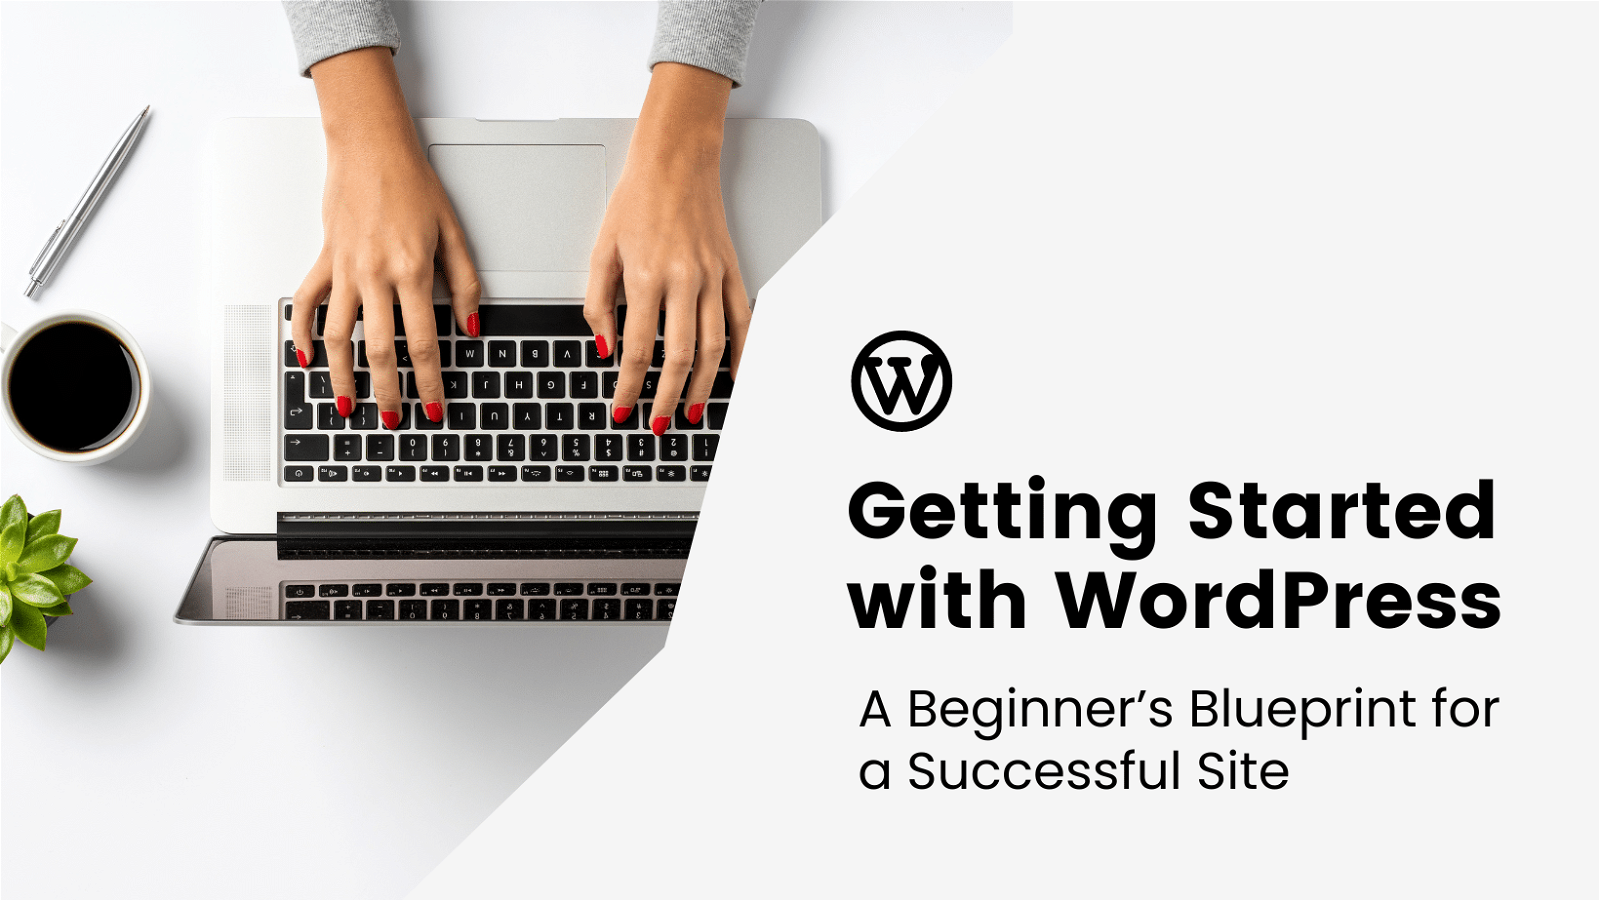 Getting started with wordpress a beginner's blueprint for a successful site.